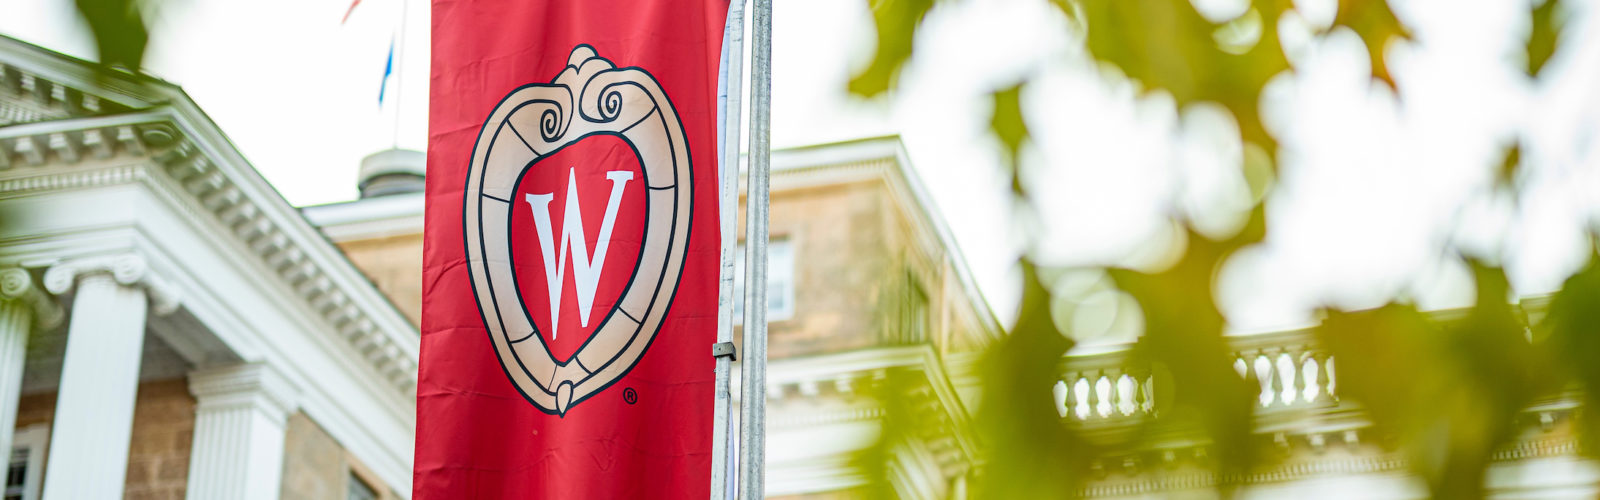 University of Wisconsin @ shield on a red banner